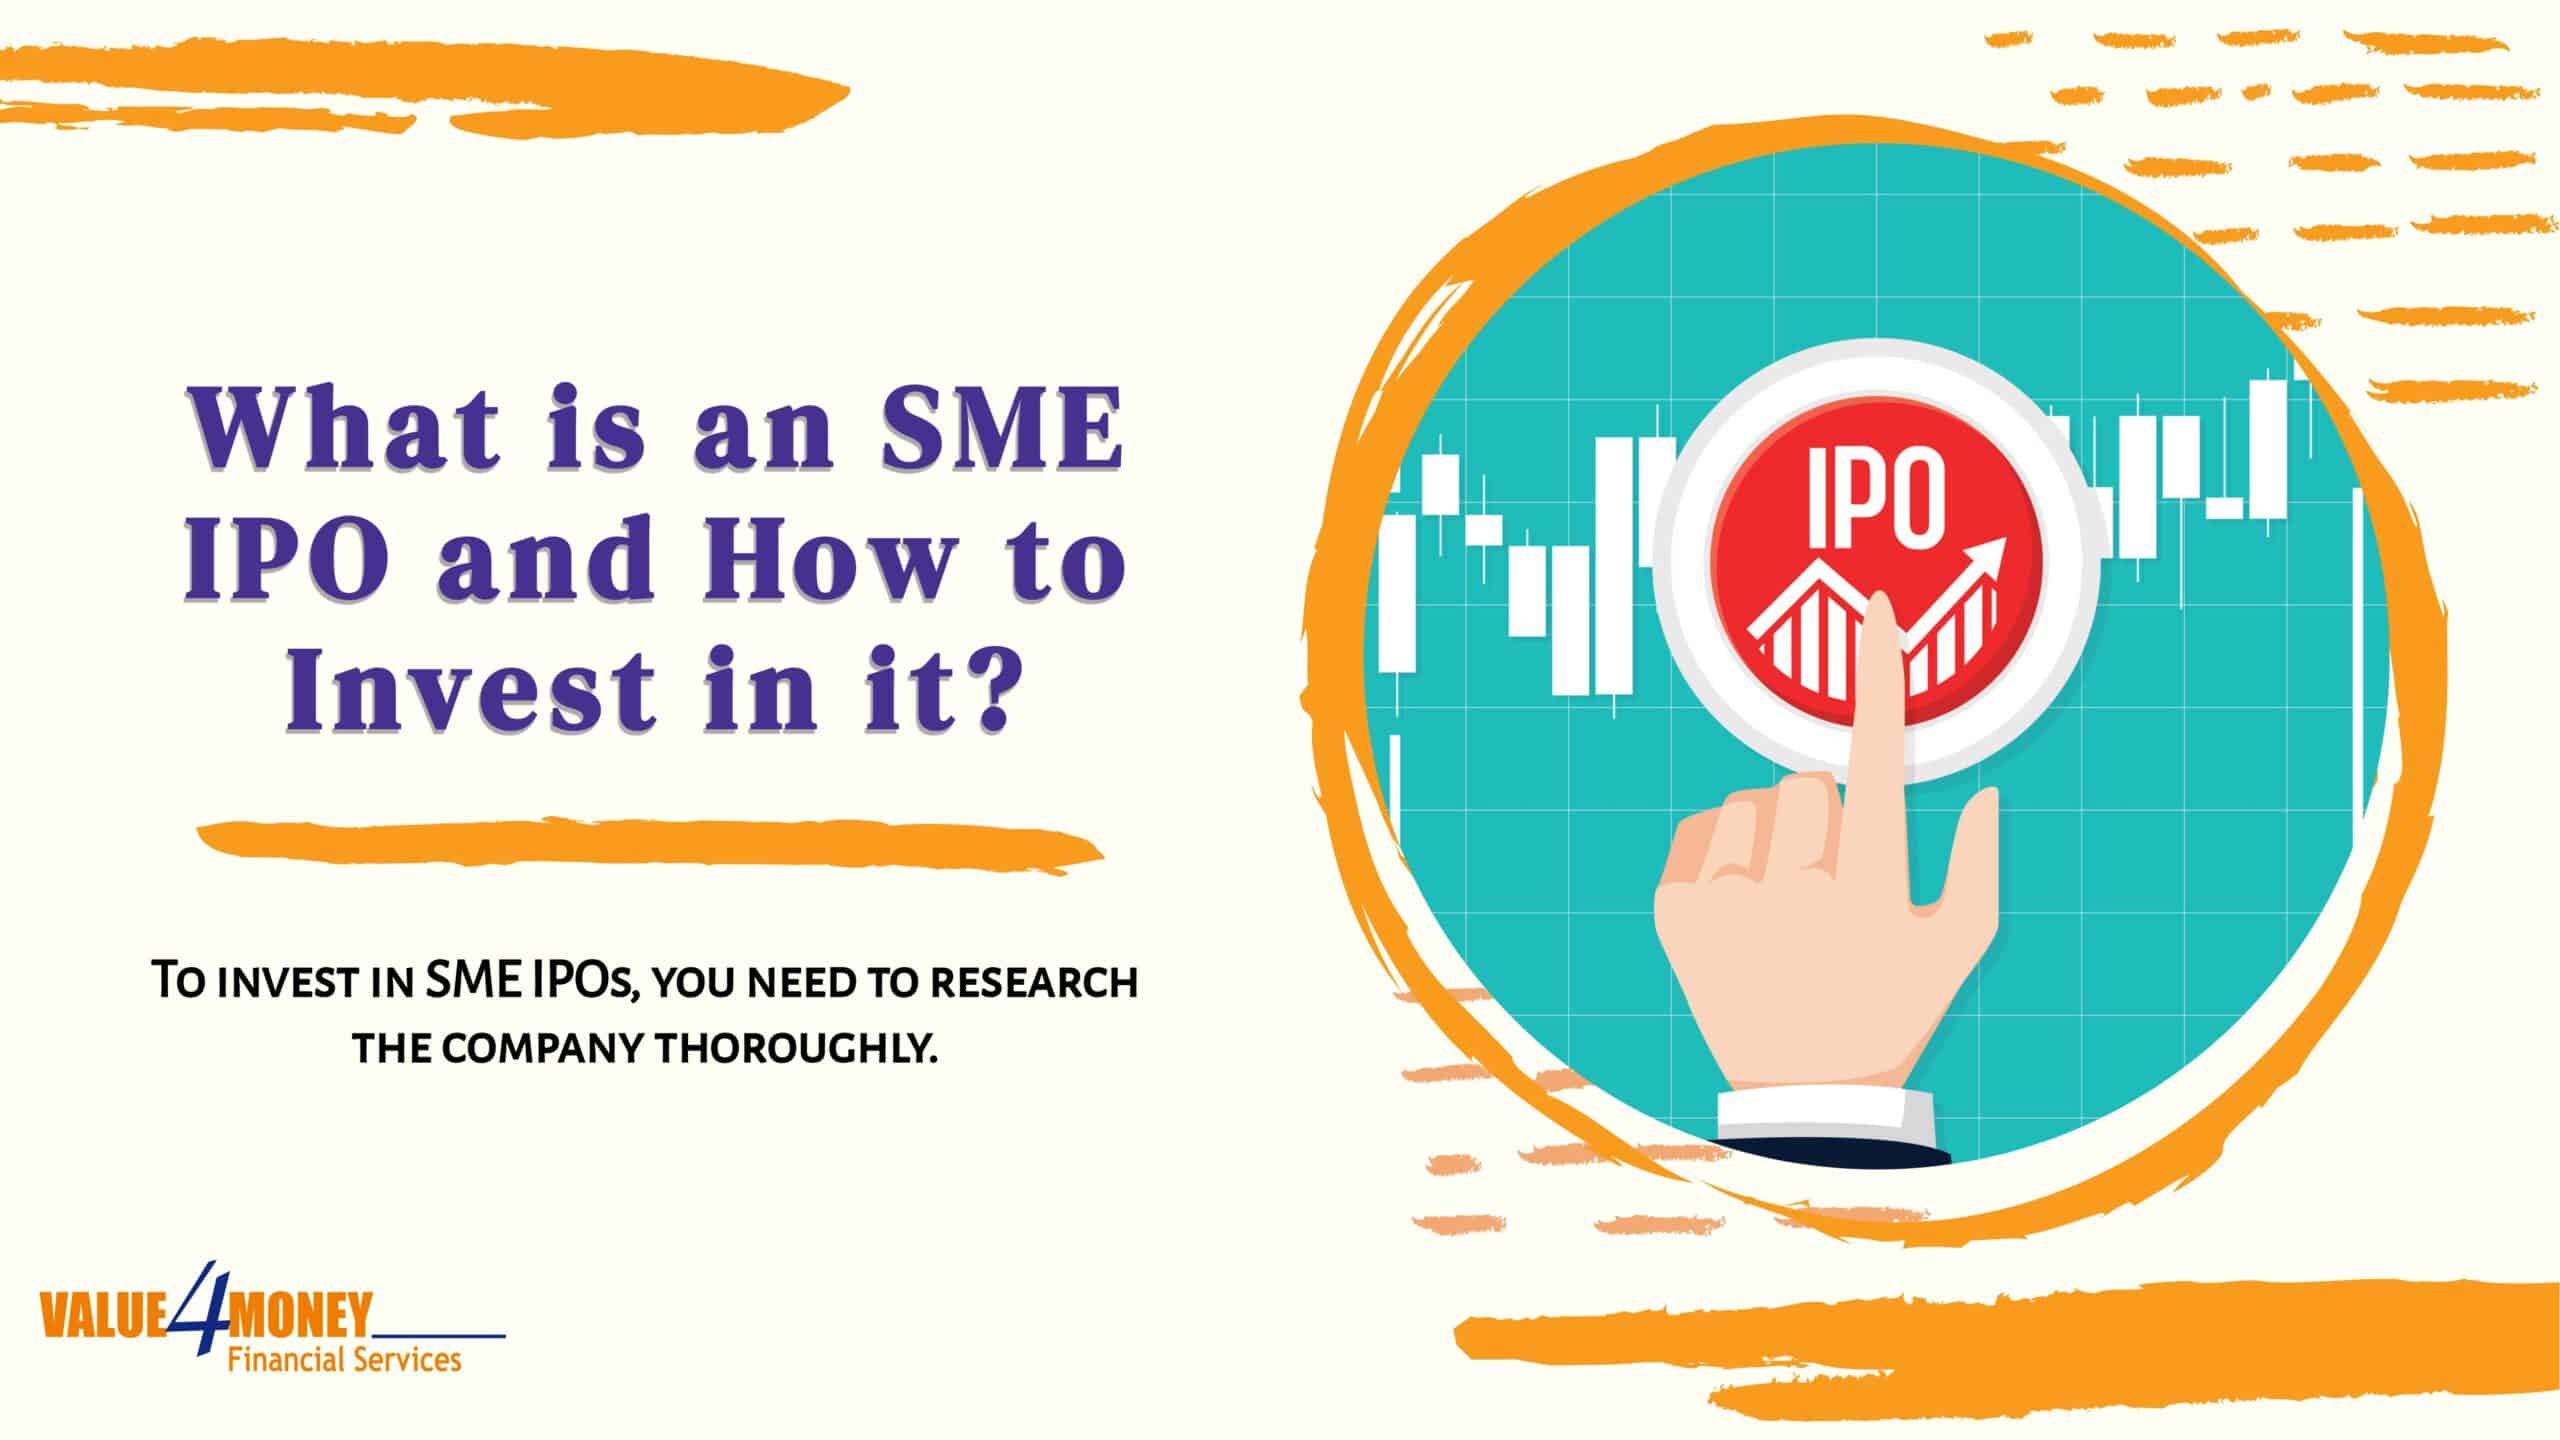 What is an SME IPO?